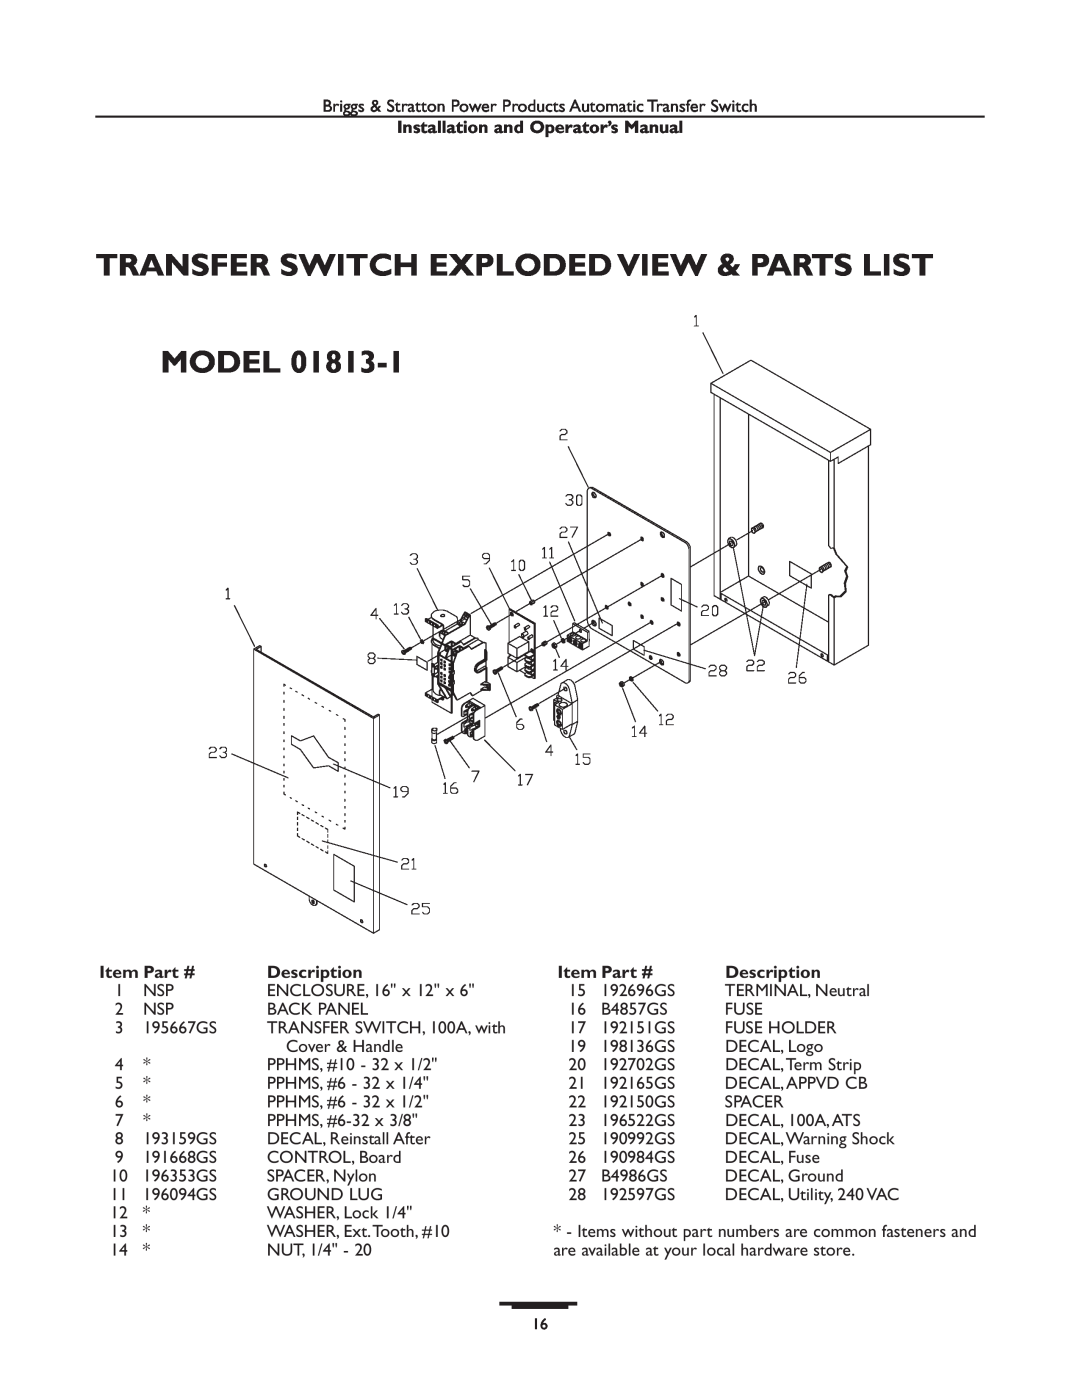 Briggs & Stratton 01928-1, 01814-1, 01929-1, 01813-1 manual Transfer Switch Exploded View & Parts List Model, Description 